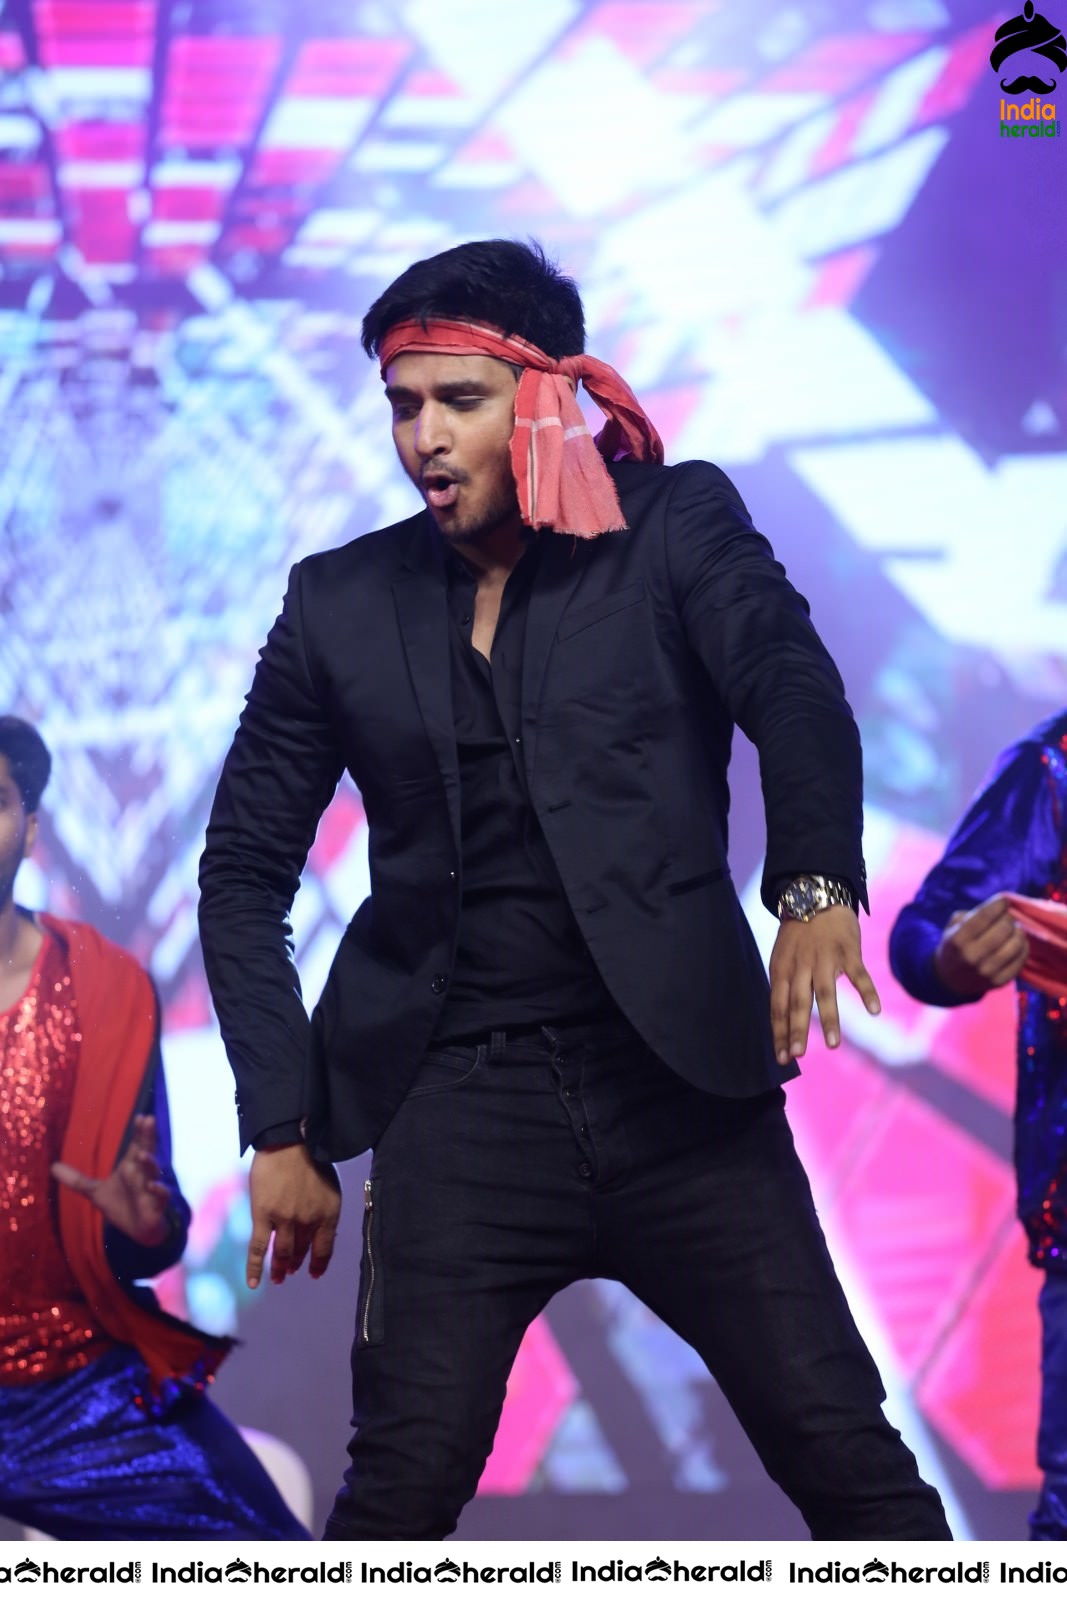 Hero Nikhil Siddhartha Sets the Stage on Fire with his Energetic Dance Set 1